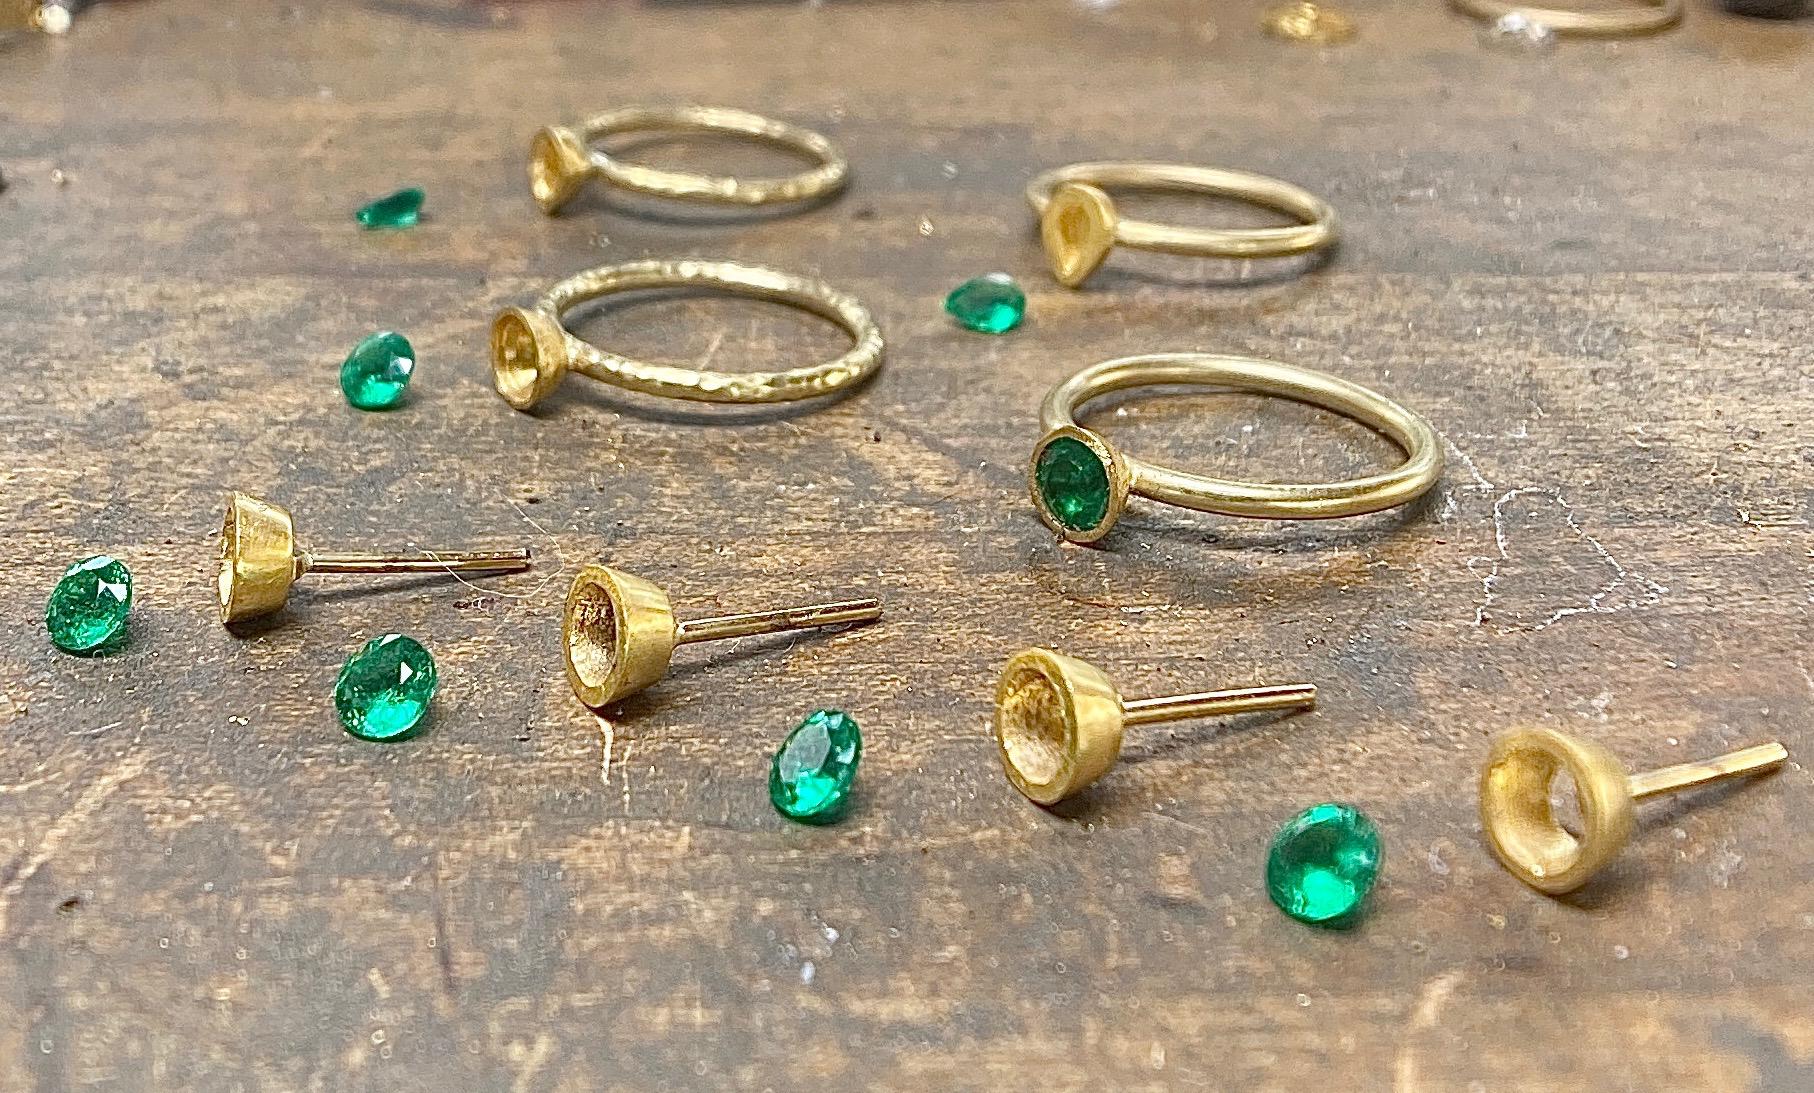 Hand forged in California by our master goldsmith, these earrings feature Colombian emerald round brilliant emeralds, set in 22 karat gold. These earrings are 5.25 mm in diameter. Enjoy the 